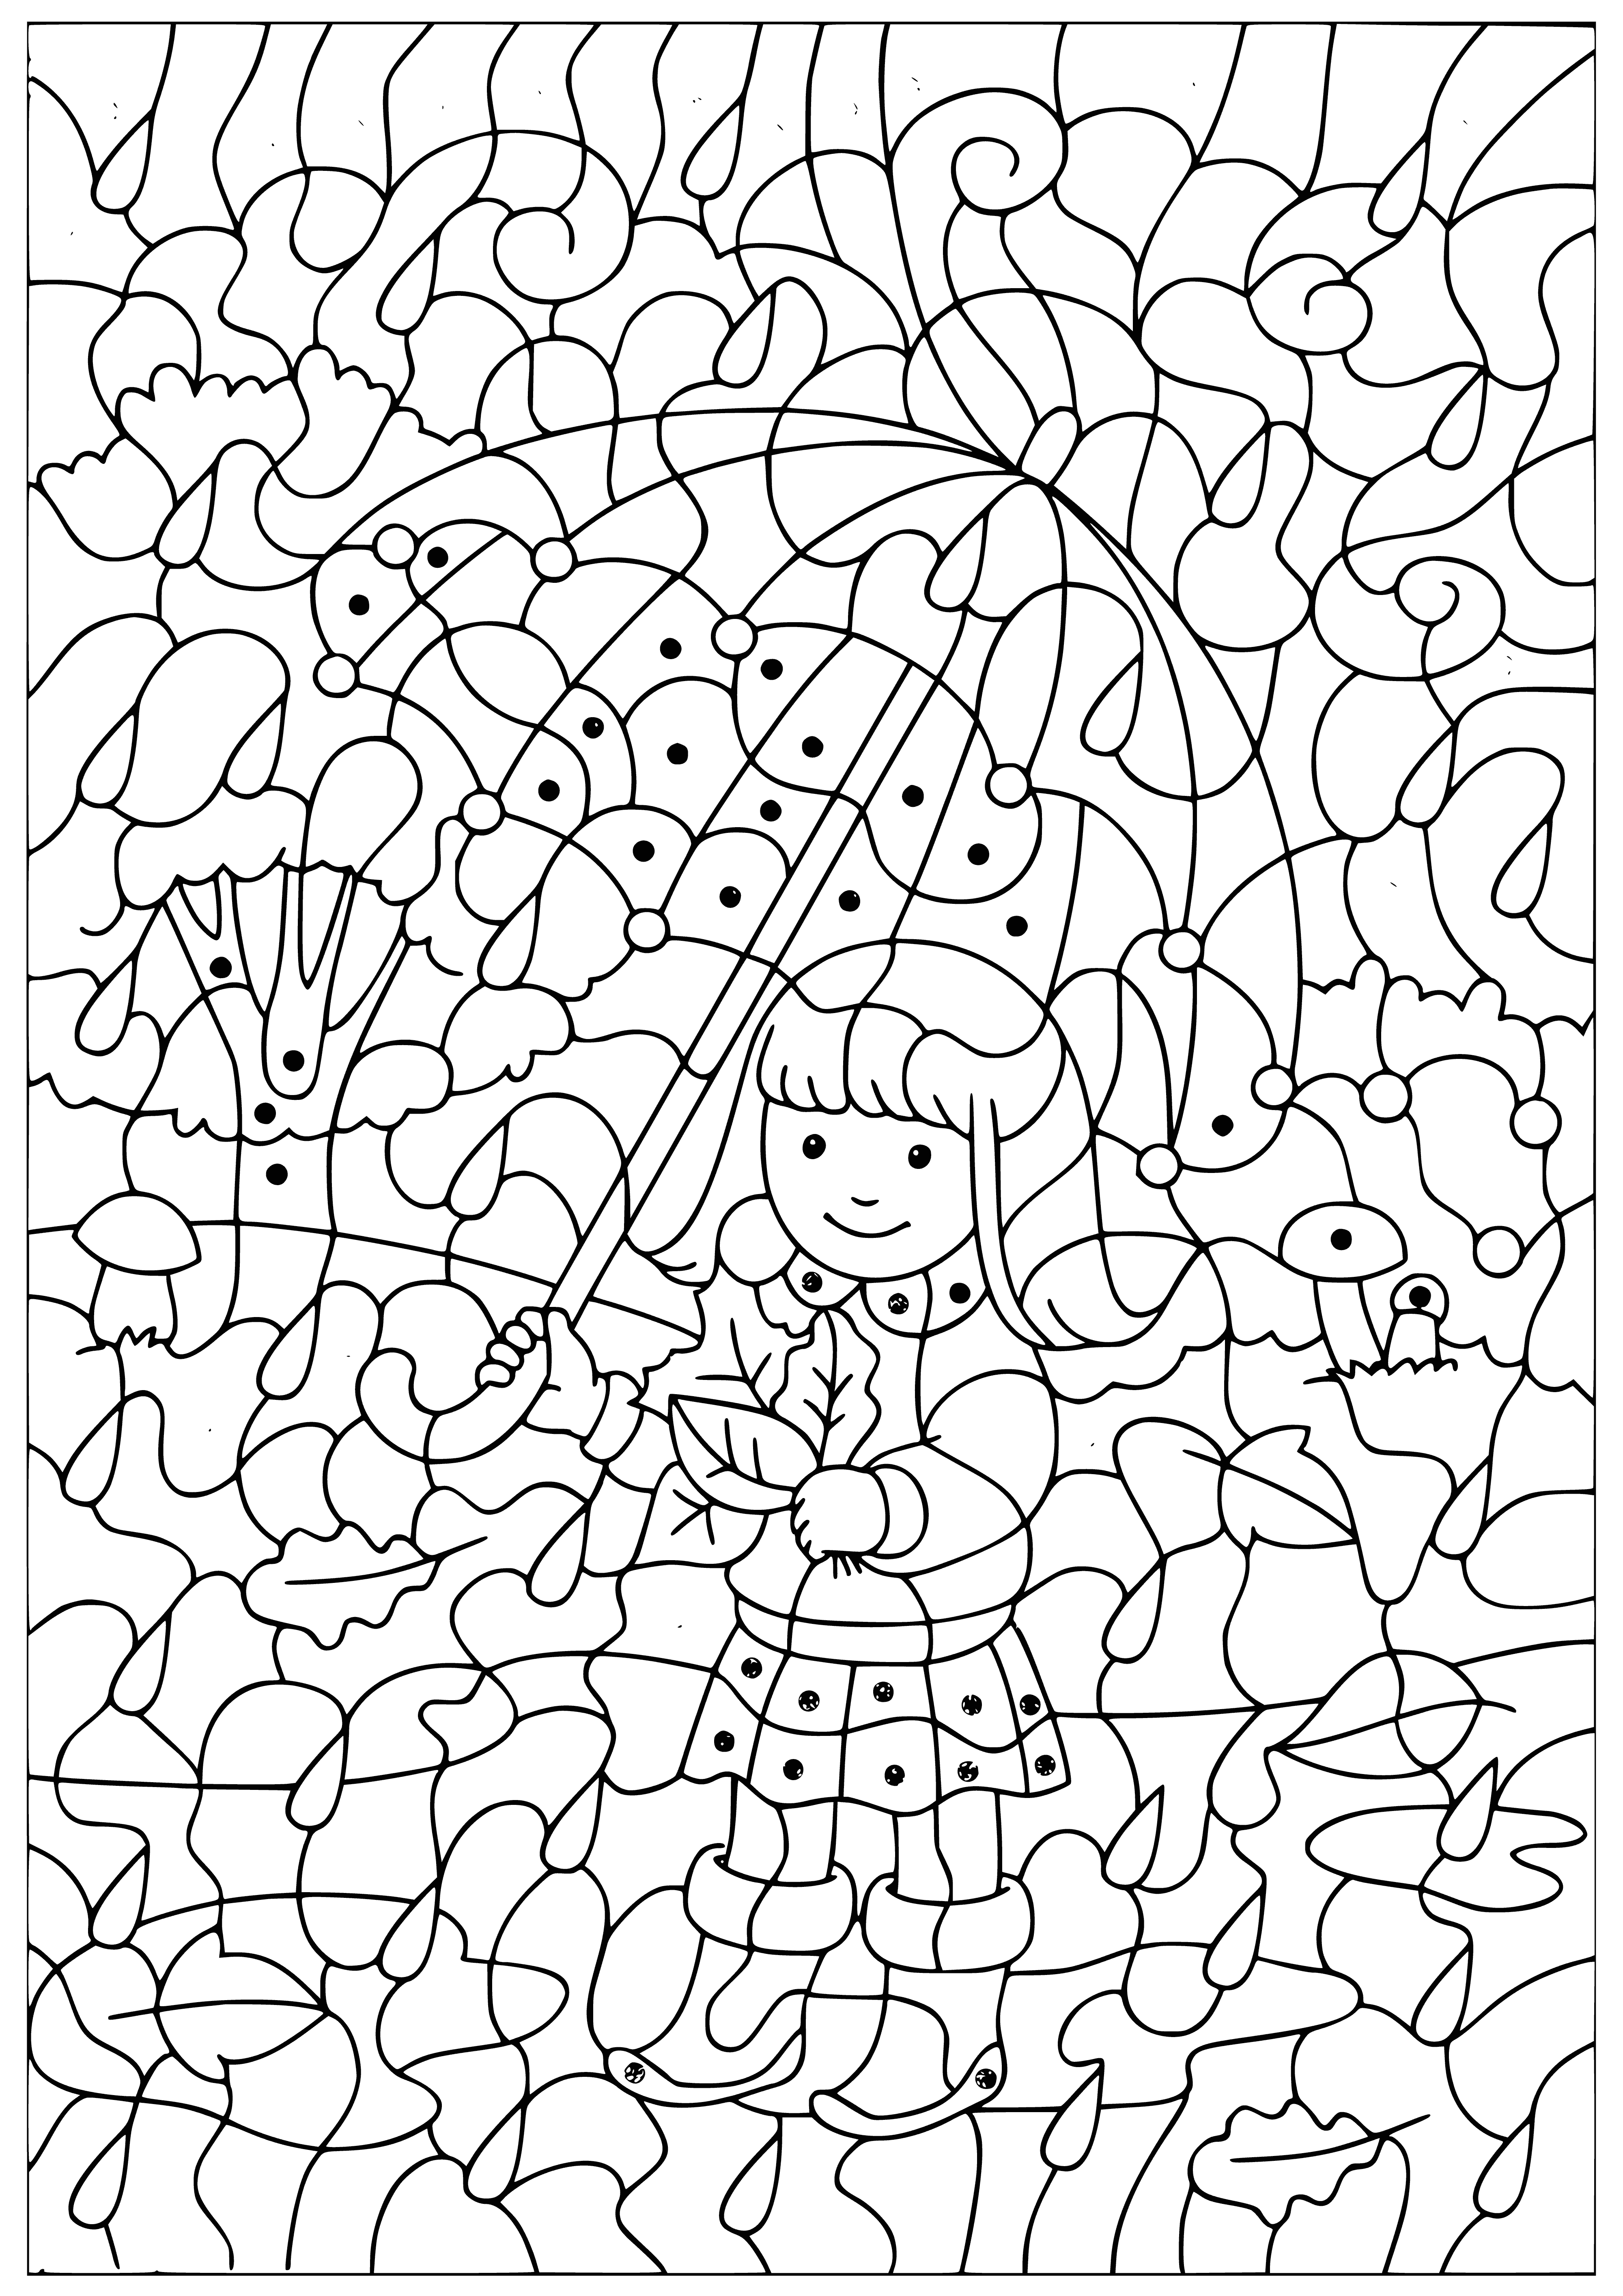 coloring page: She is enjoying the feel and smell of the rain. 
Girl walks in rain w/umbrella, enjoying feel & smell of rain. #RainyDay